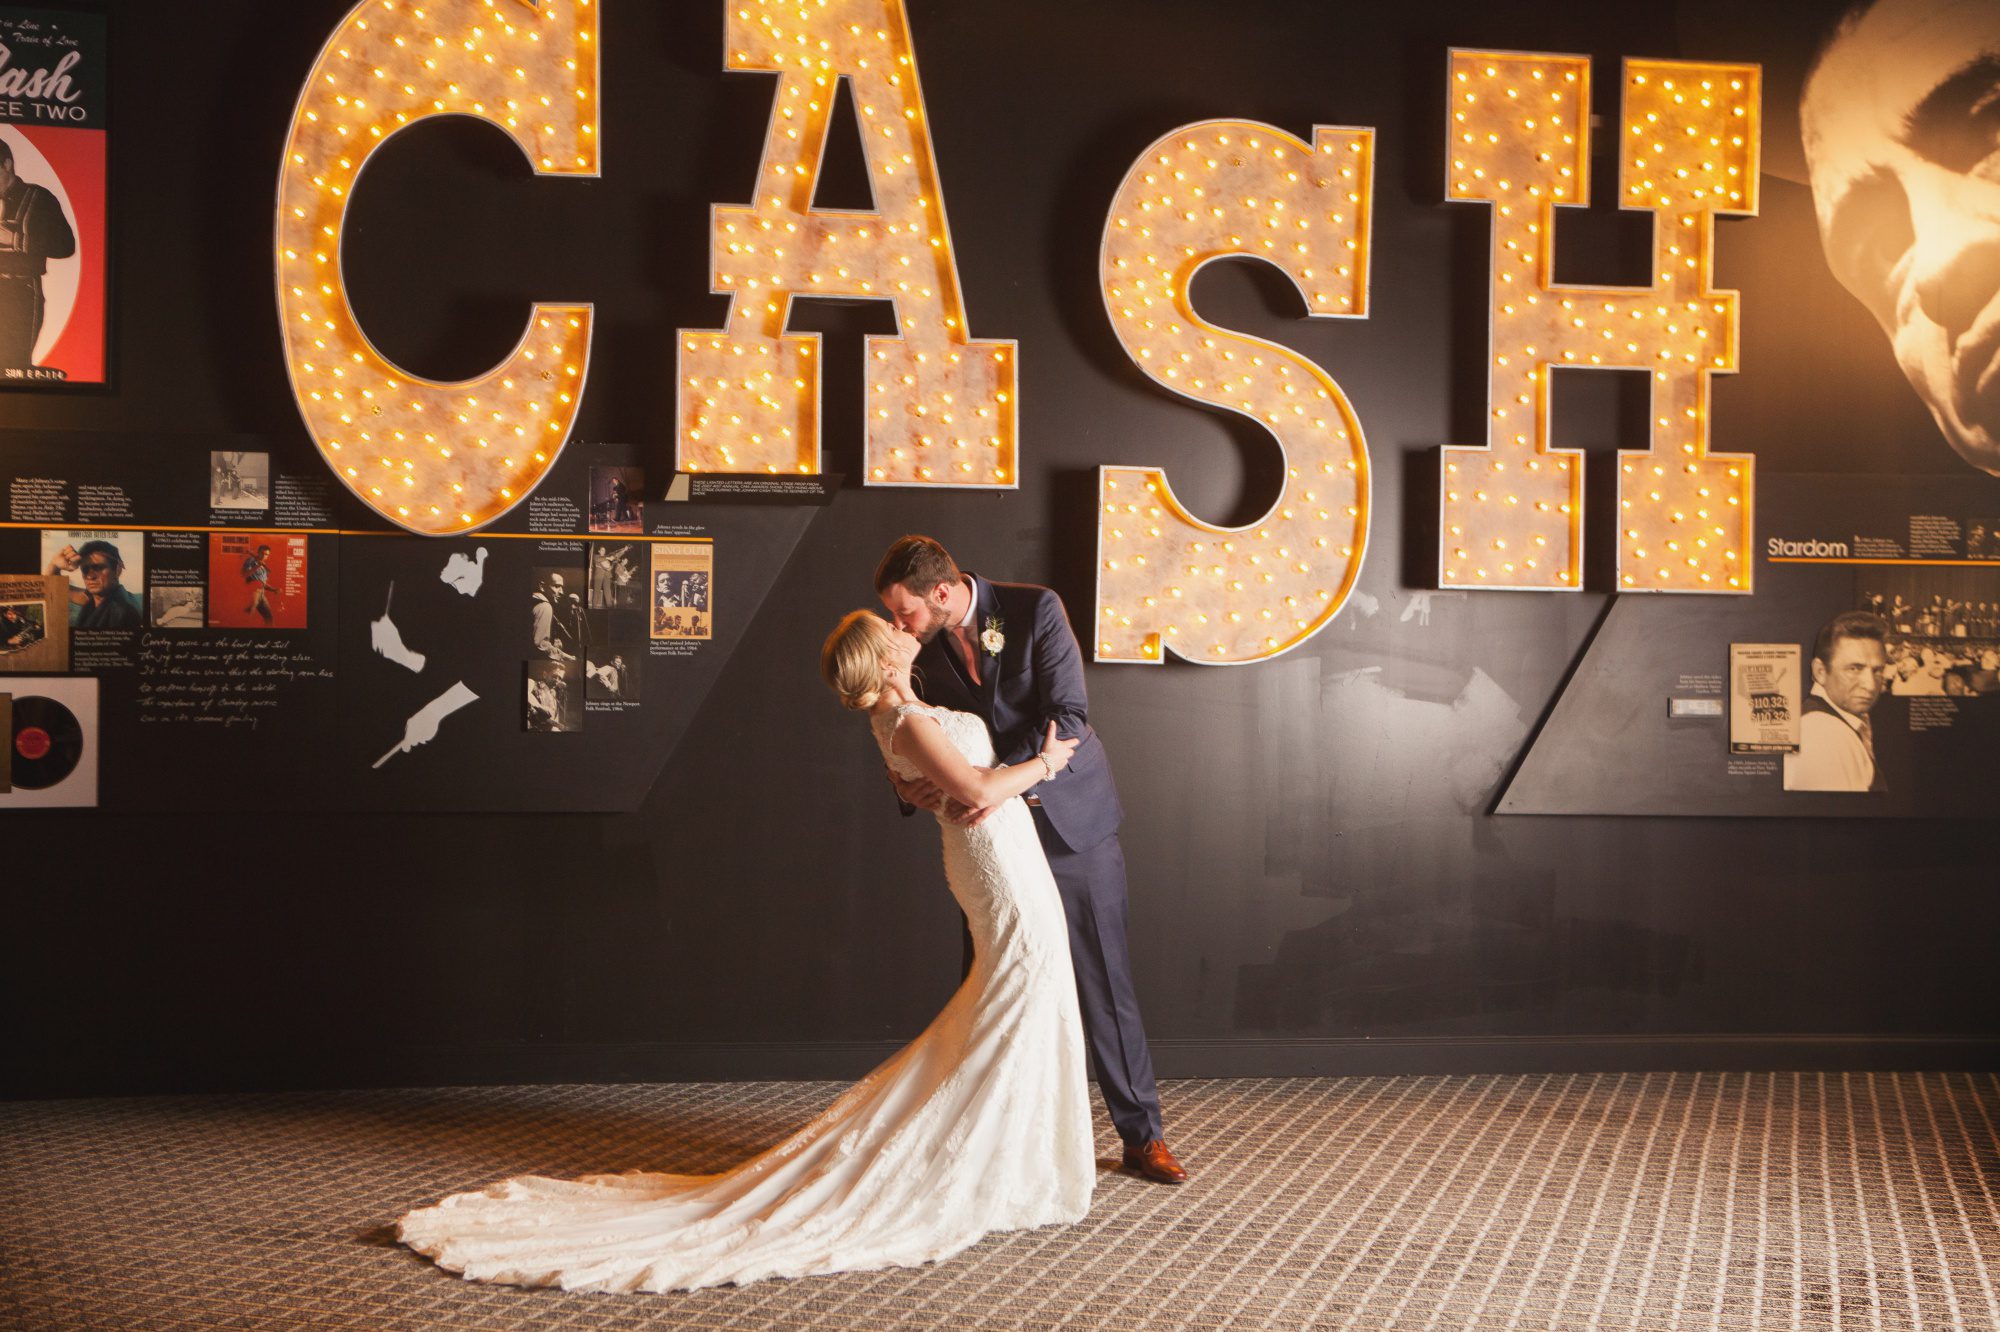 Bride and groom wedding photo with Johnny Cash wall before wedding photography at Musicians Hall of Fame in Nashville TN photos by Krista Lee 